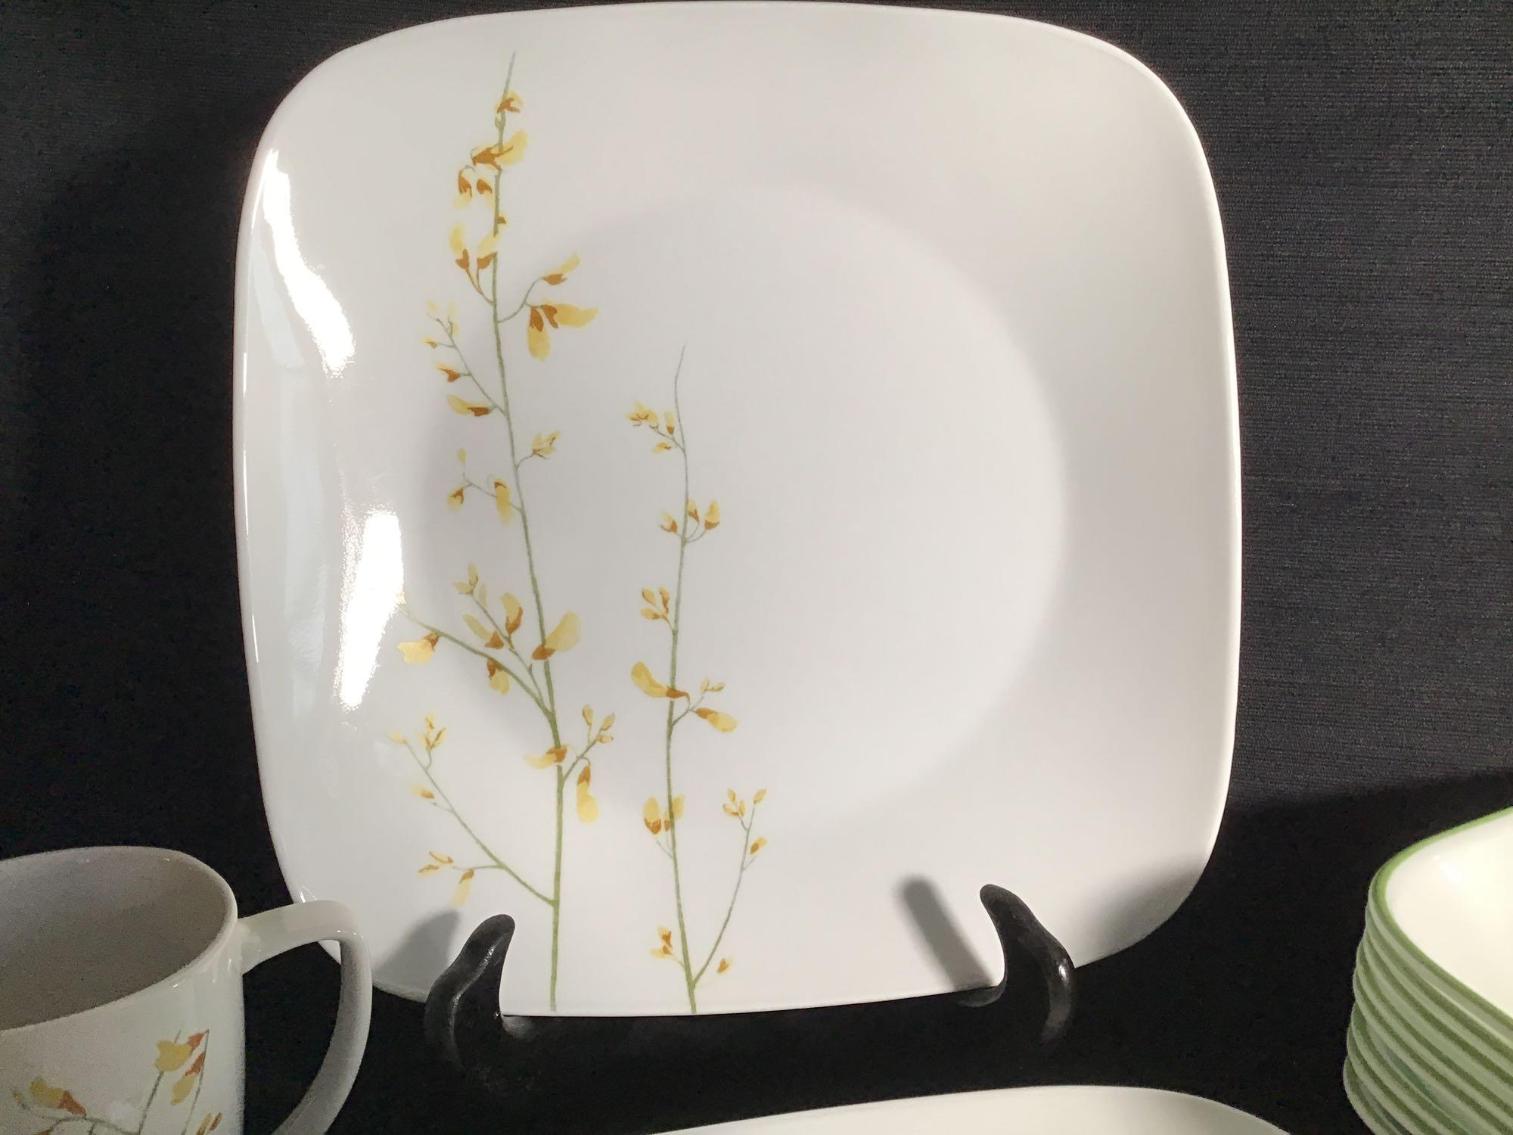 Image for Corelle Dinnerware by Corning